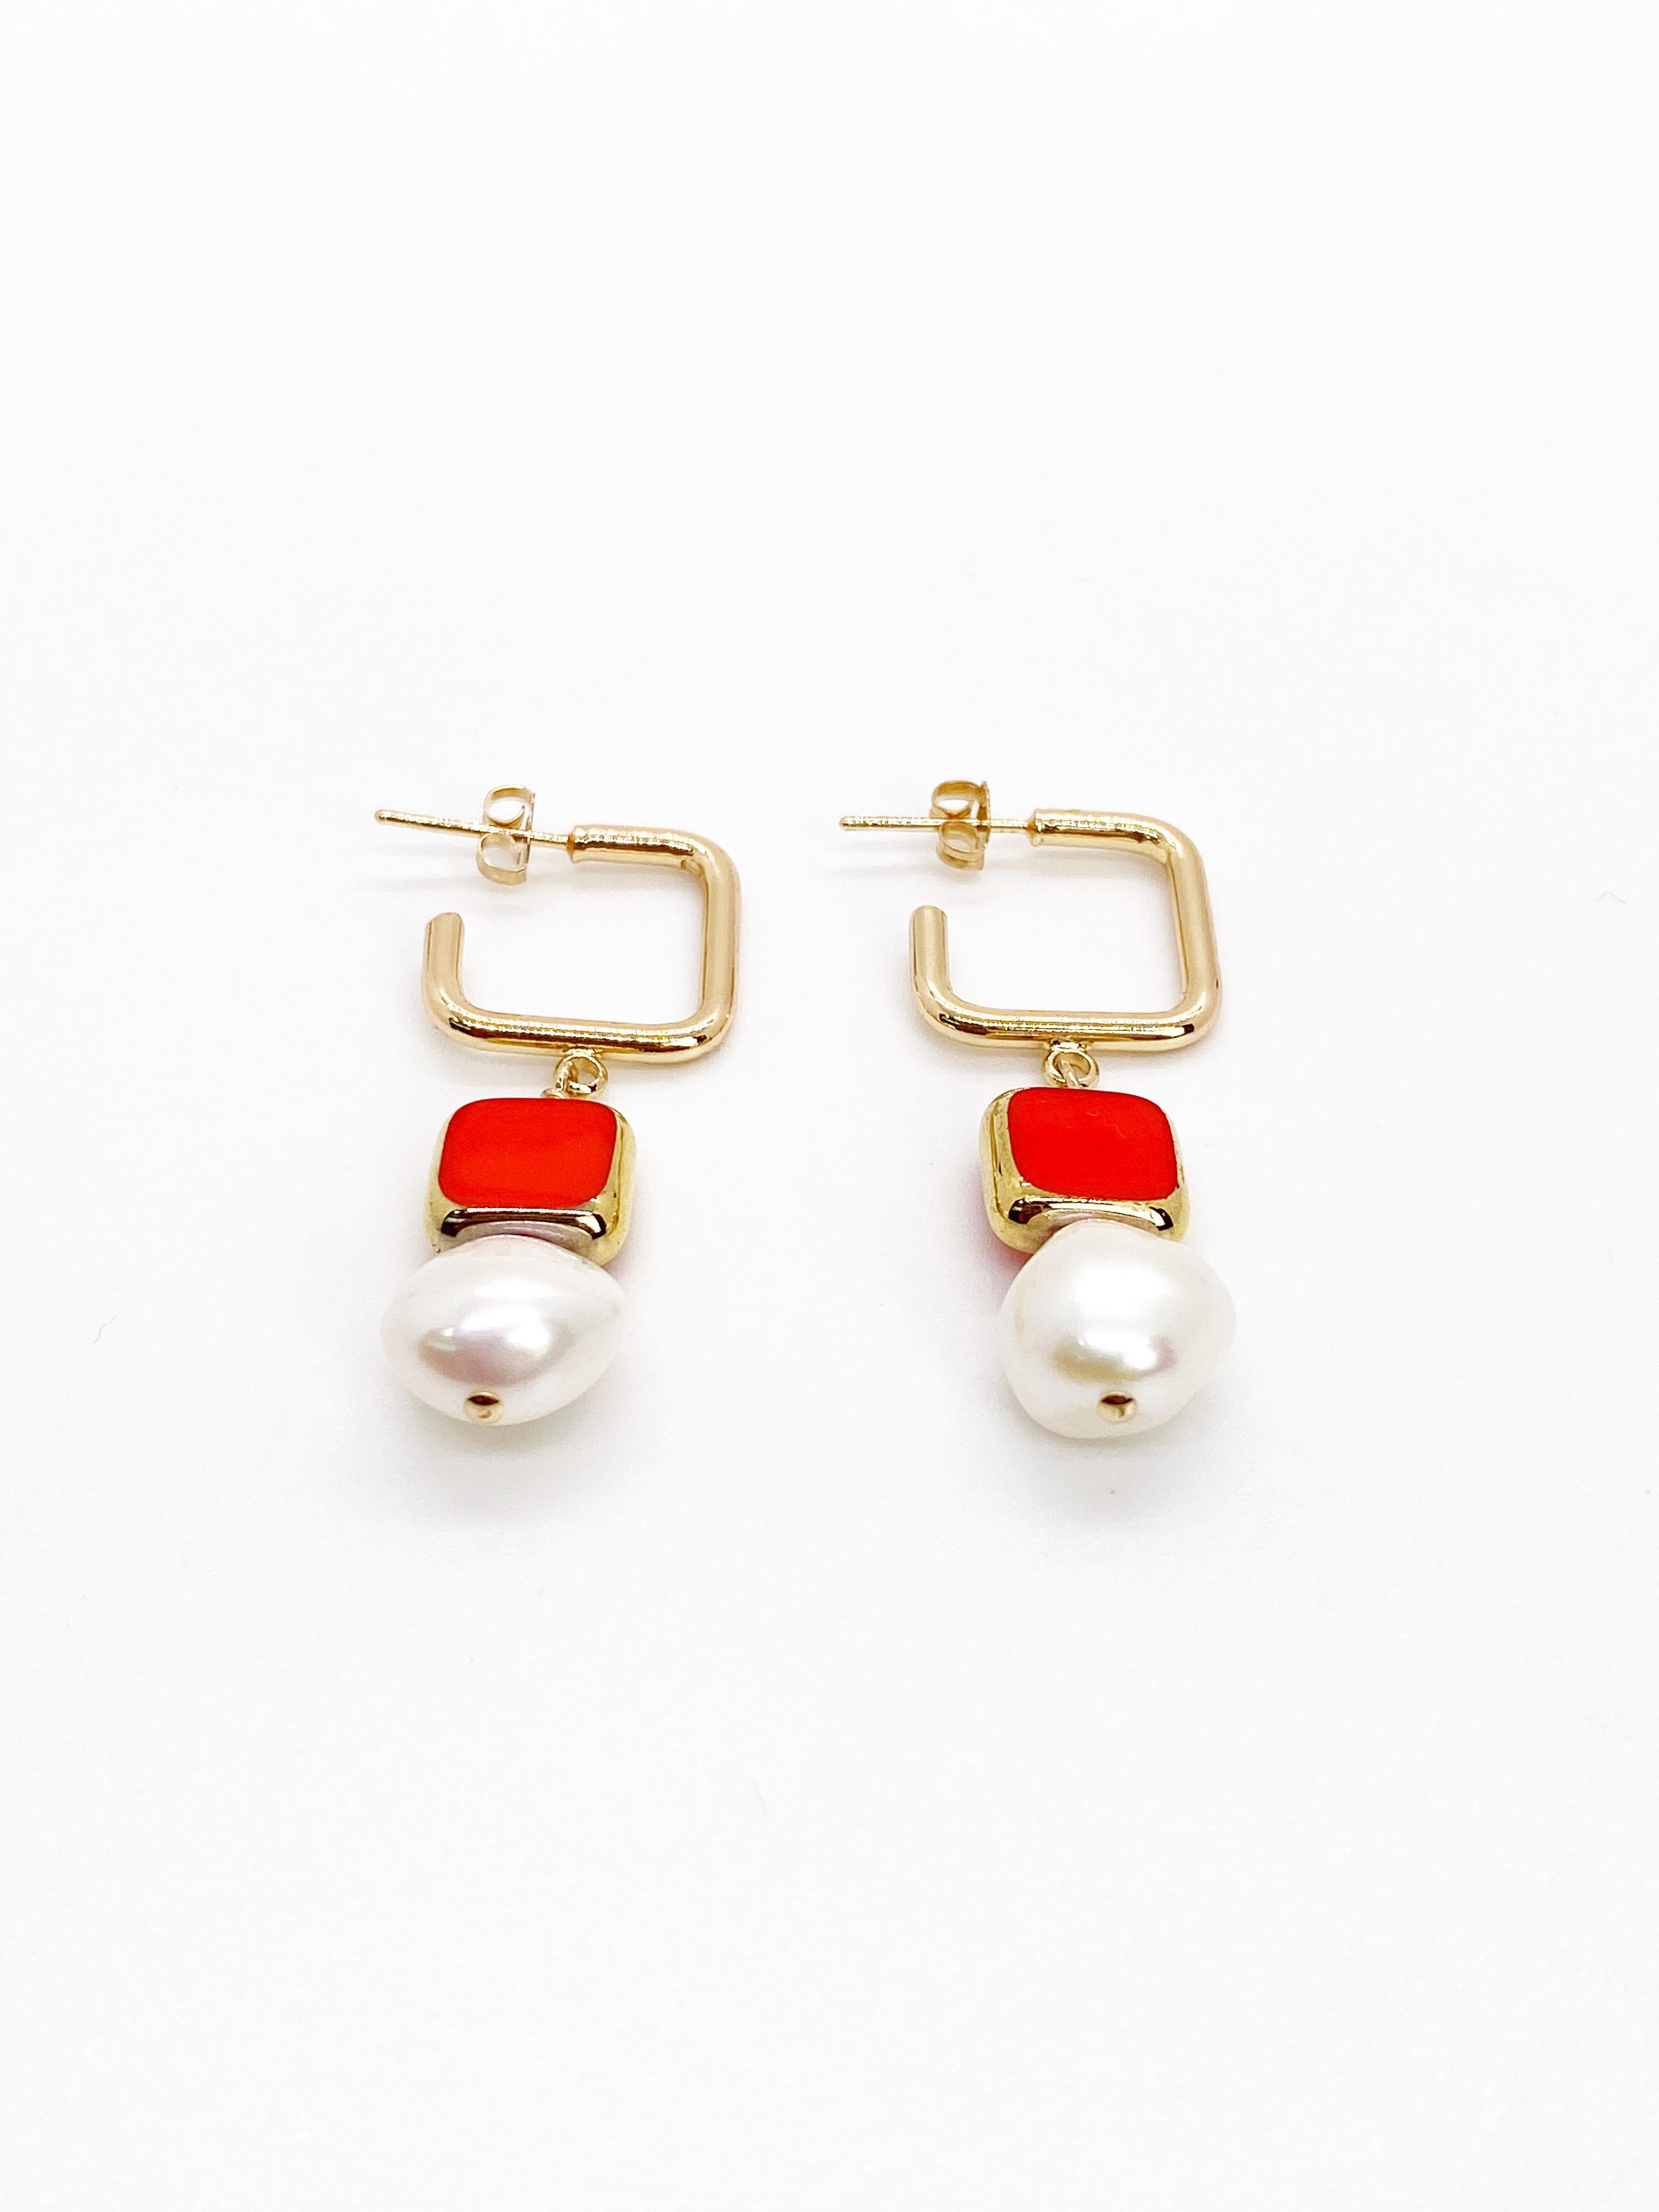 Simple and elegant. The earrings consist of opaque red colored glass beads with freshwater pearls which hang on 18K gold fill earring component.

The vintage German glass beads are edged with 24K gold and were hand pressed during the 1920s- 1960s.